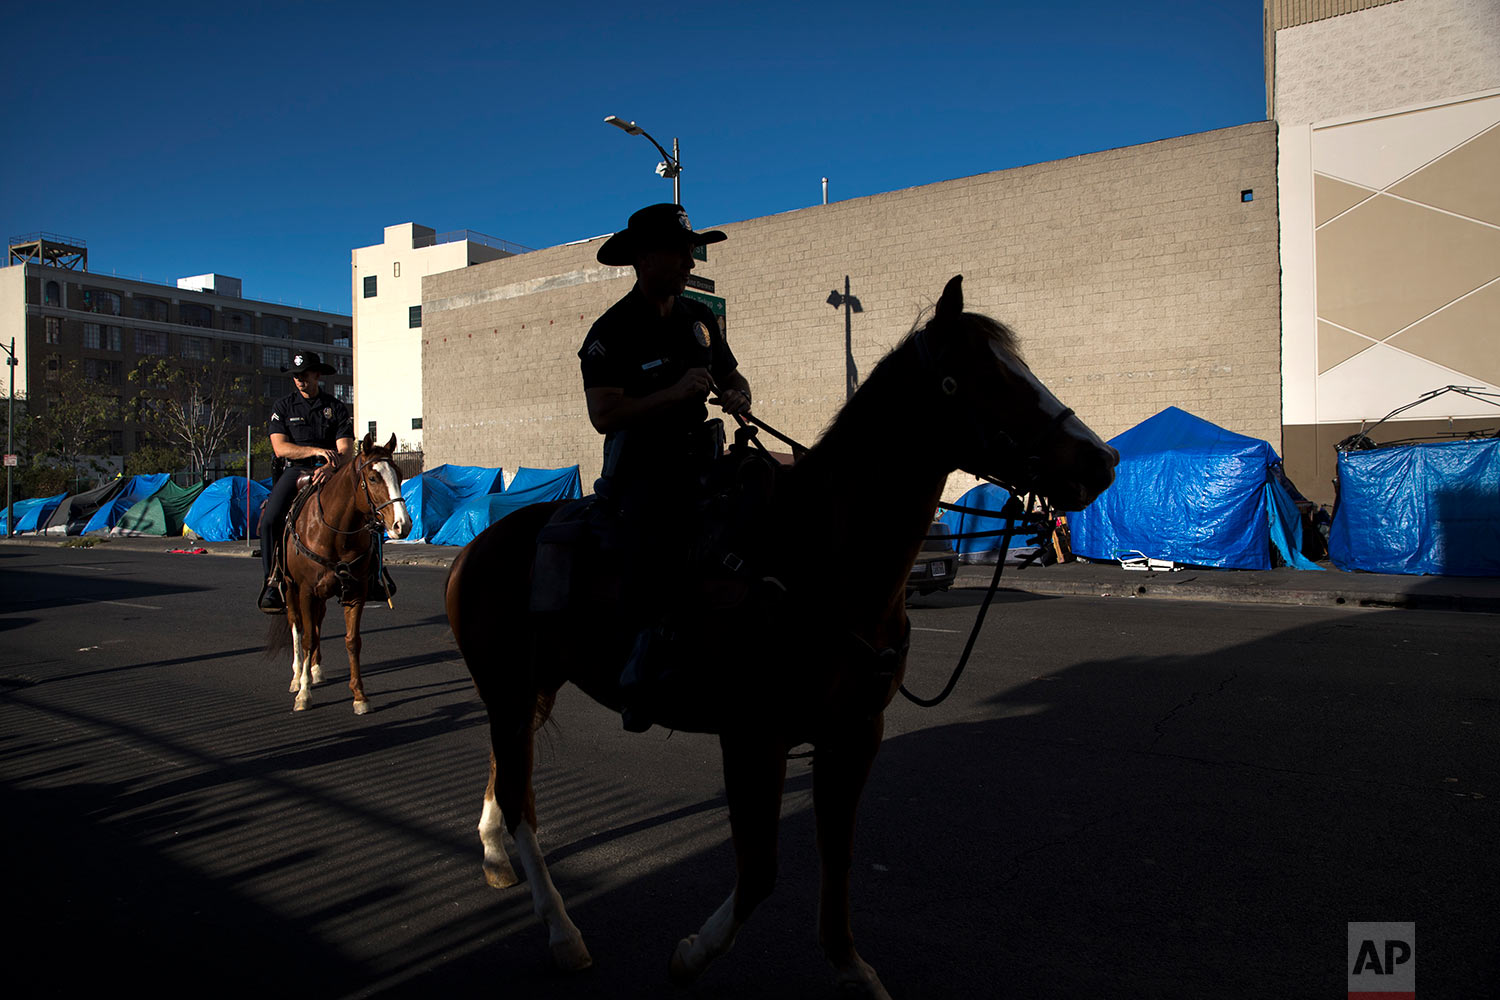  Tents belonging to homeless people are covered with tarps as Los Angeles police officers on horses patrol in the Skid Row area of downtown Los Angeles Friday, Dec. 1, 2017. A homeless crisis of unprecedented proportions is rocking the West Coast, an